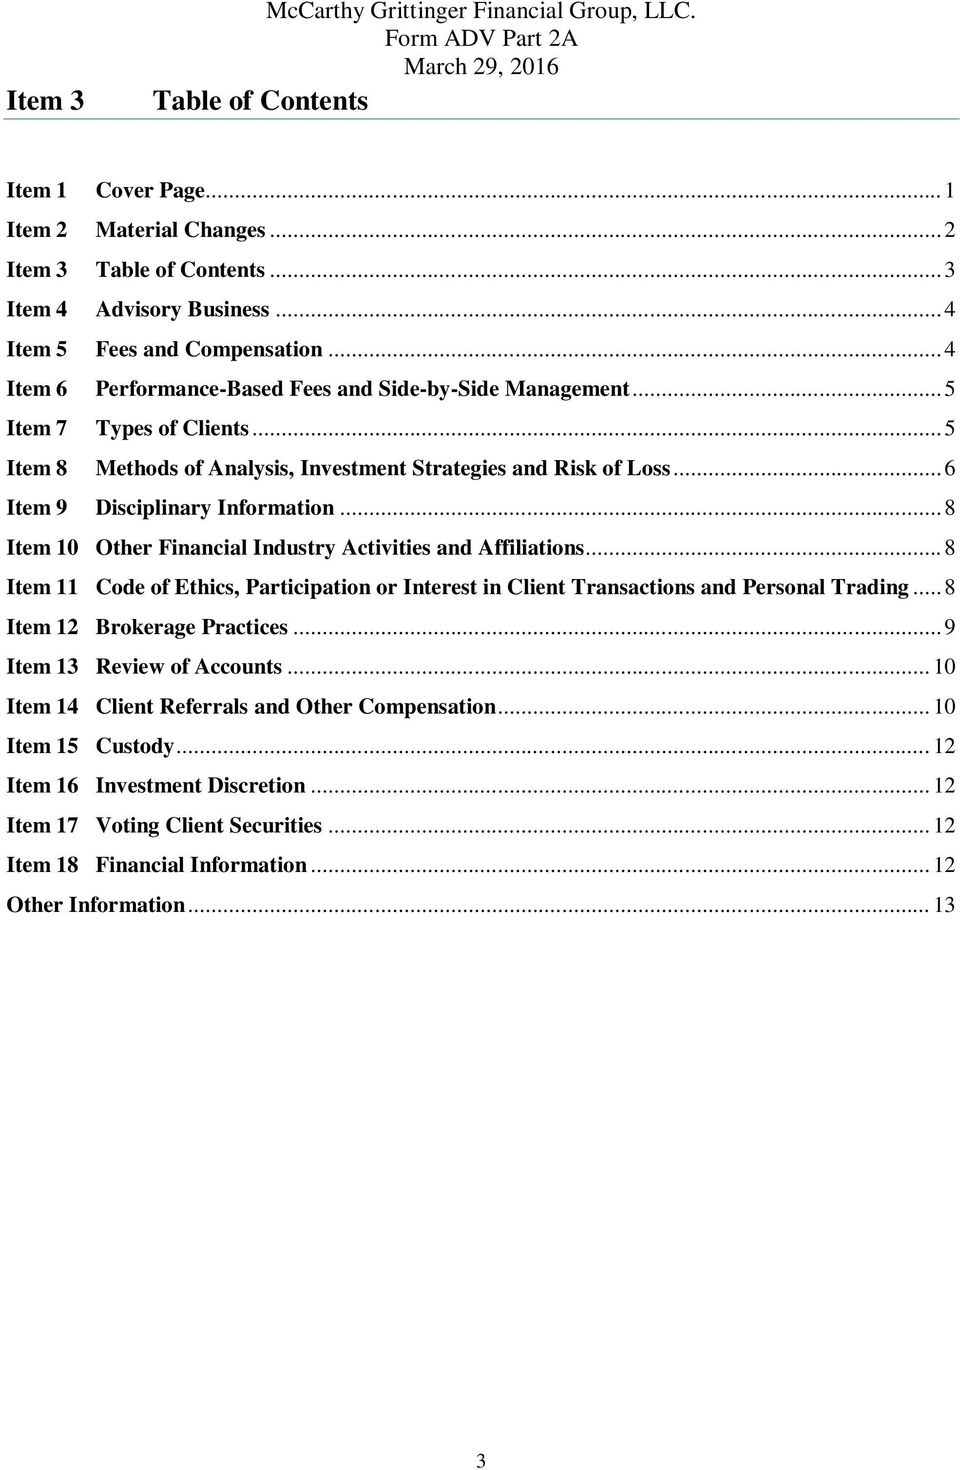 .. 6 Item 9 Disciplinary Information... 8 Item 10 Other Financial Industry Activities and Affiliations... 8 Item 11 Code of Ethics, Participation or Interest in Client Transactions and Personal Trading.